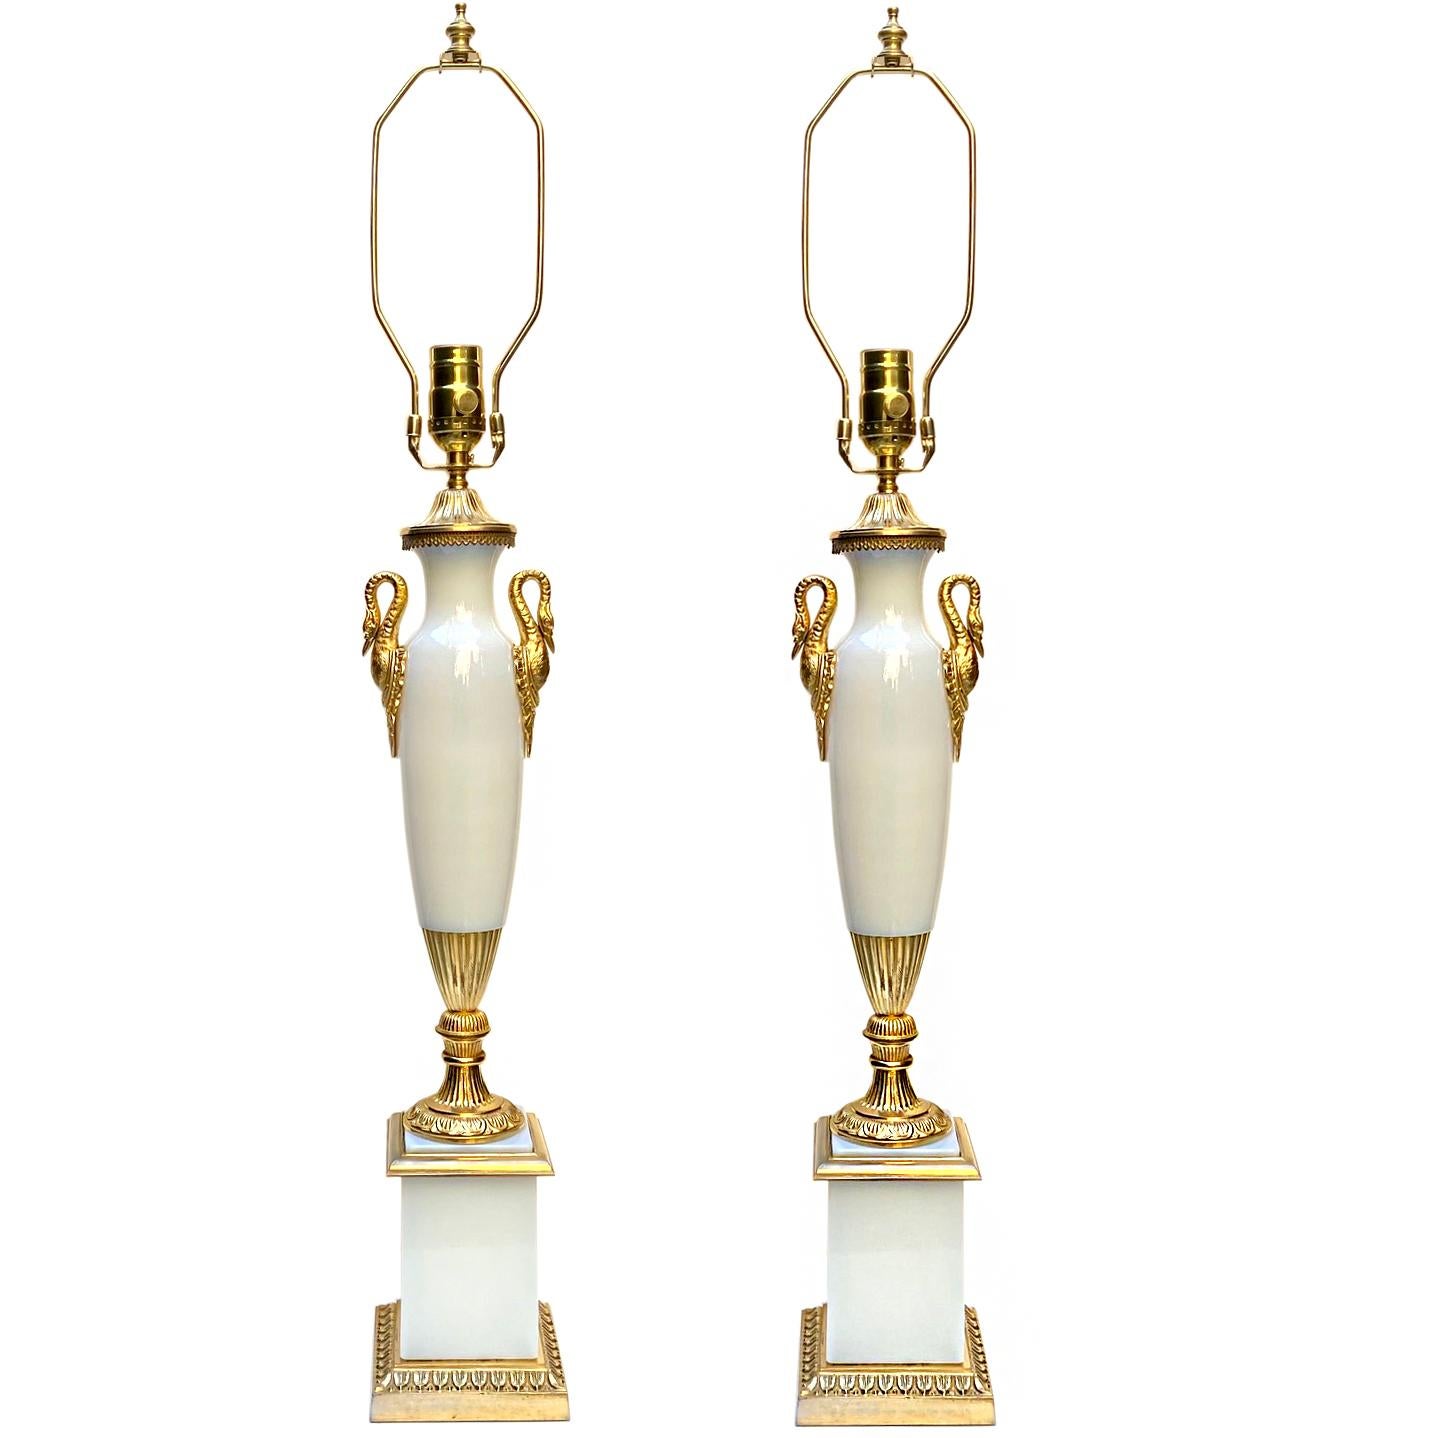 A pair of French circa 1920s Empire style gilt bronze and white opaline glass table lamps.

Measurements:
Height of body: 21